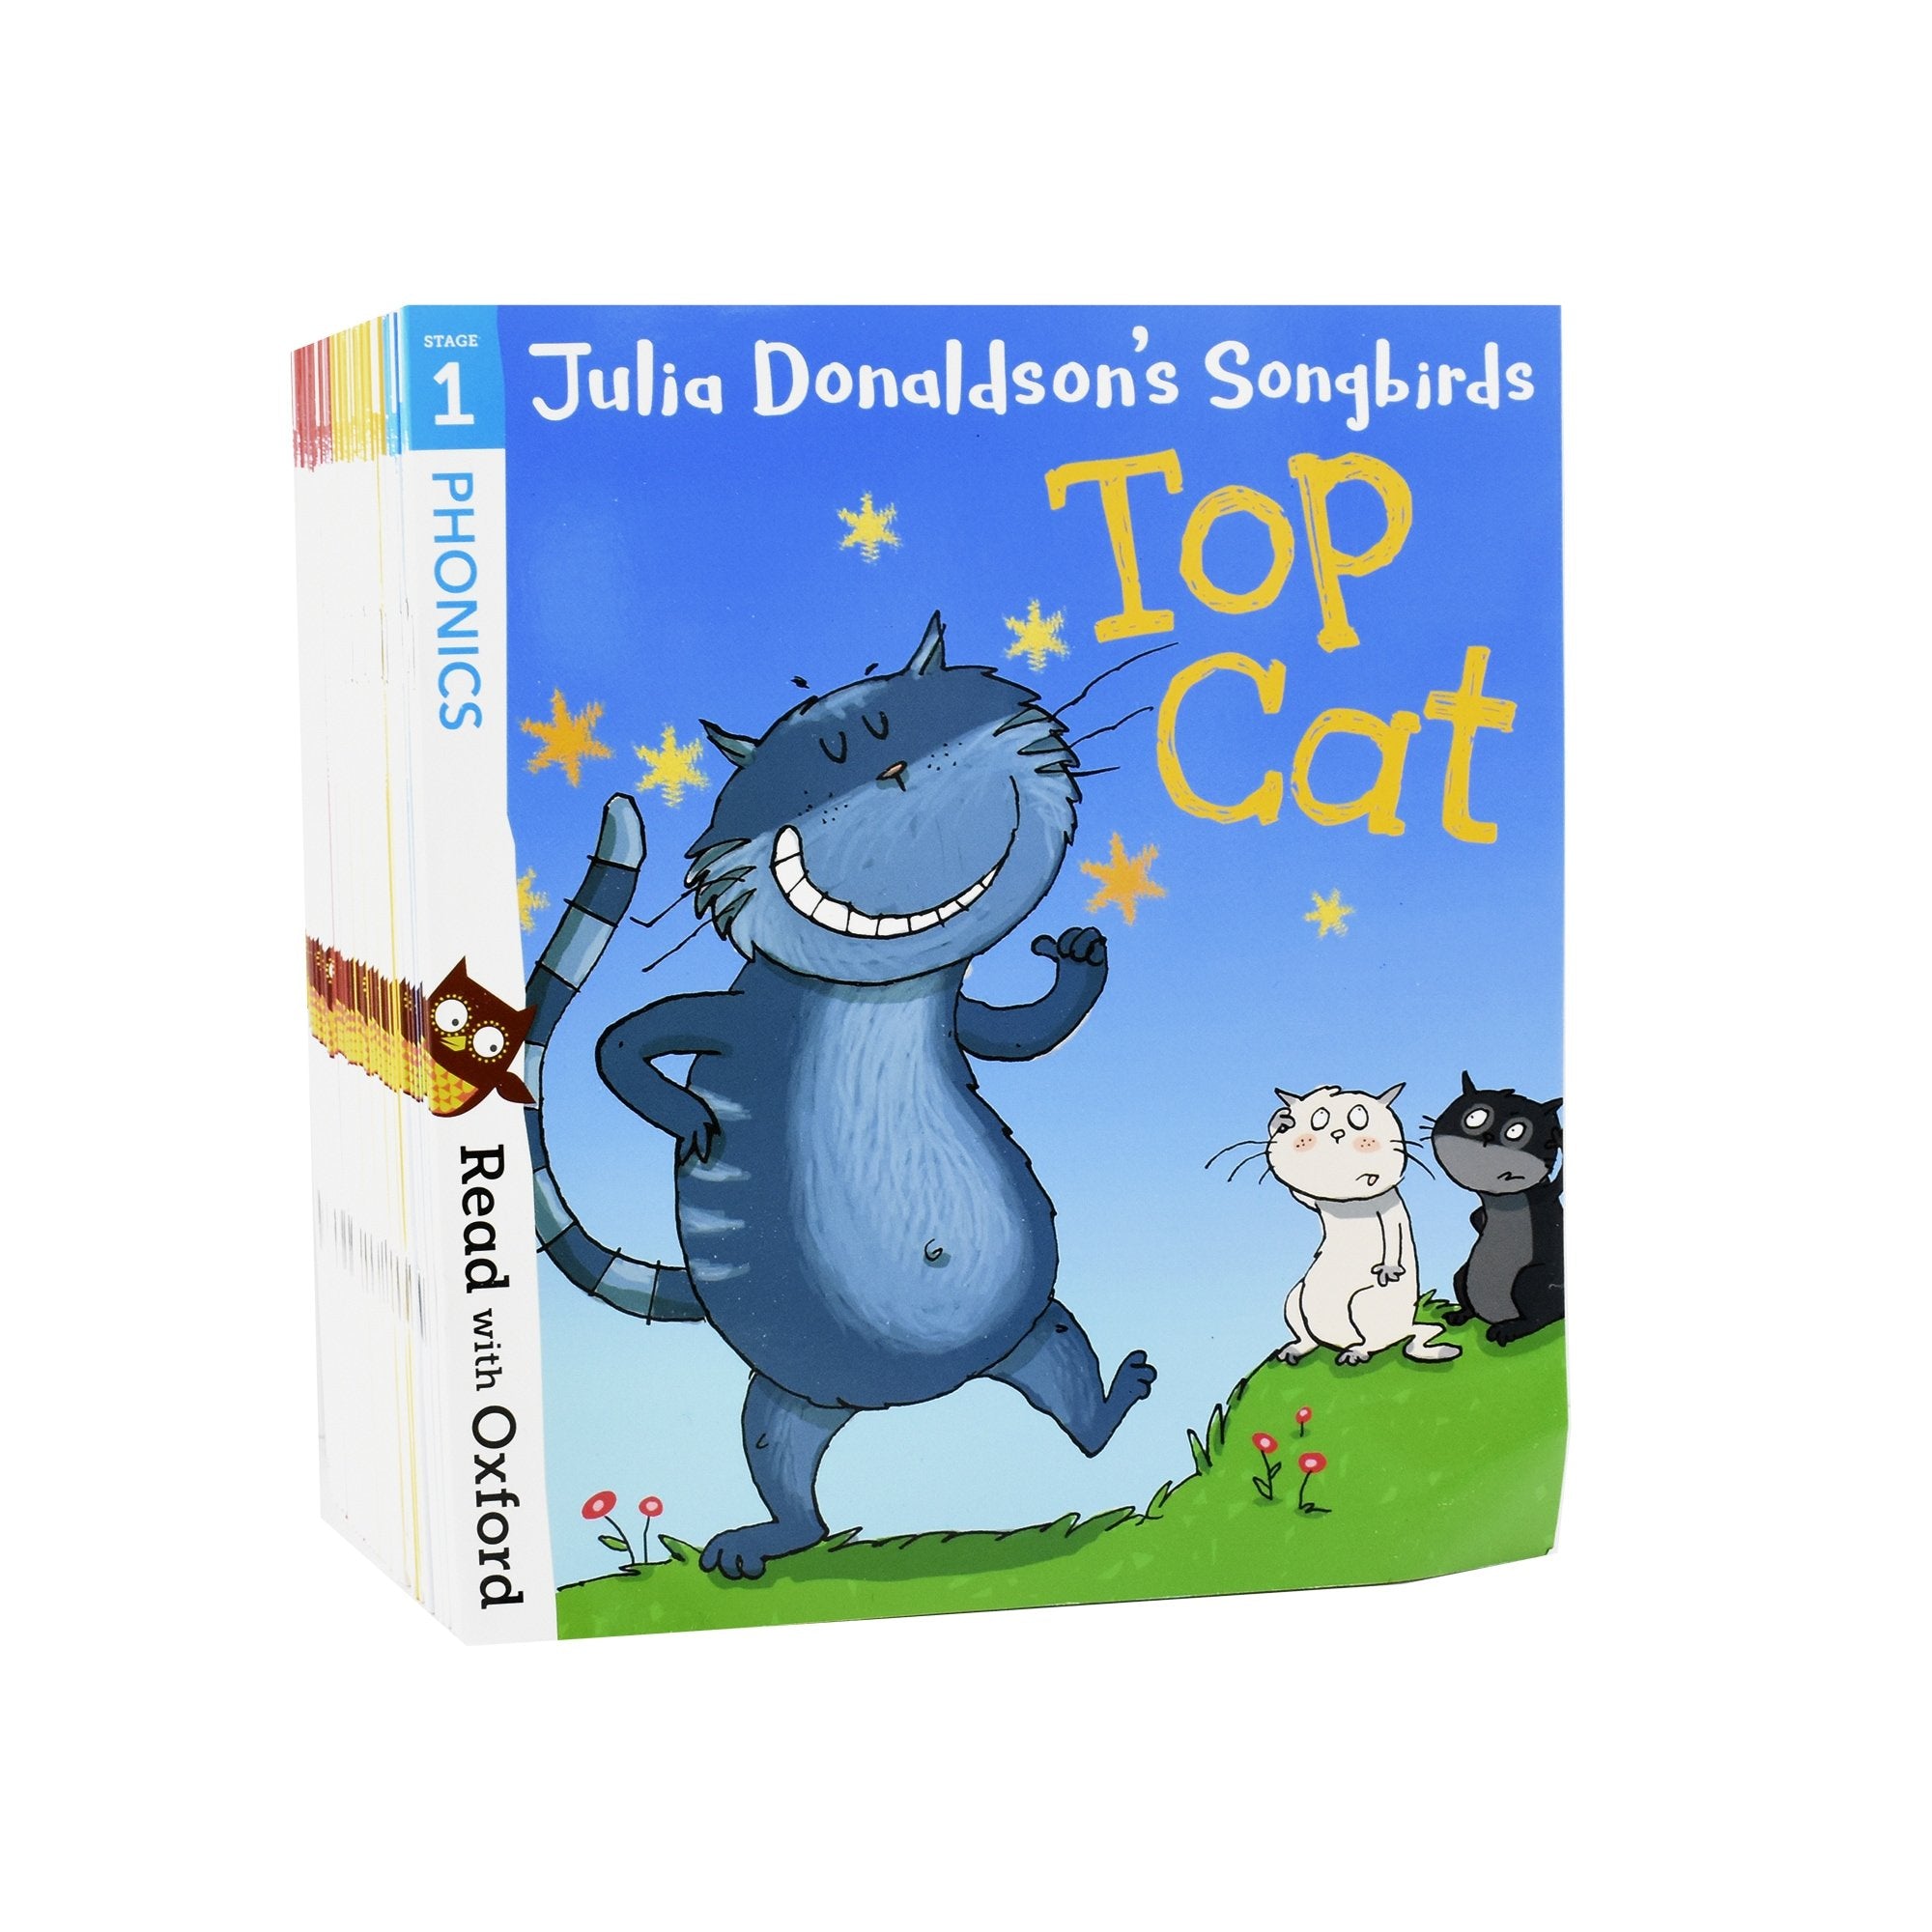 Books　Books　Just　Read　Songbirds　–　Collecti　Donaldson's　36　Oxford　Phonics　with　Julia　Kids